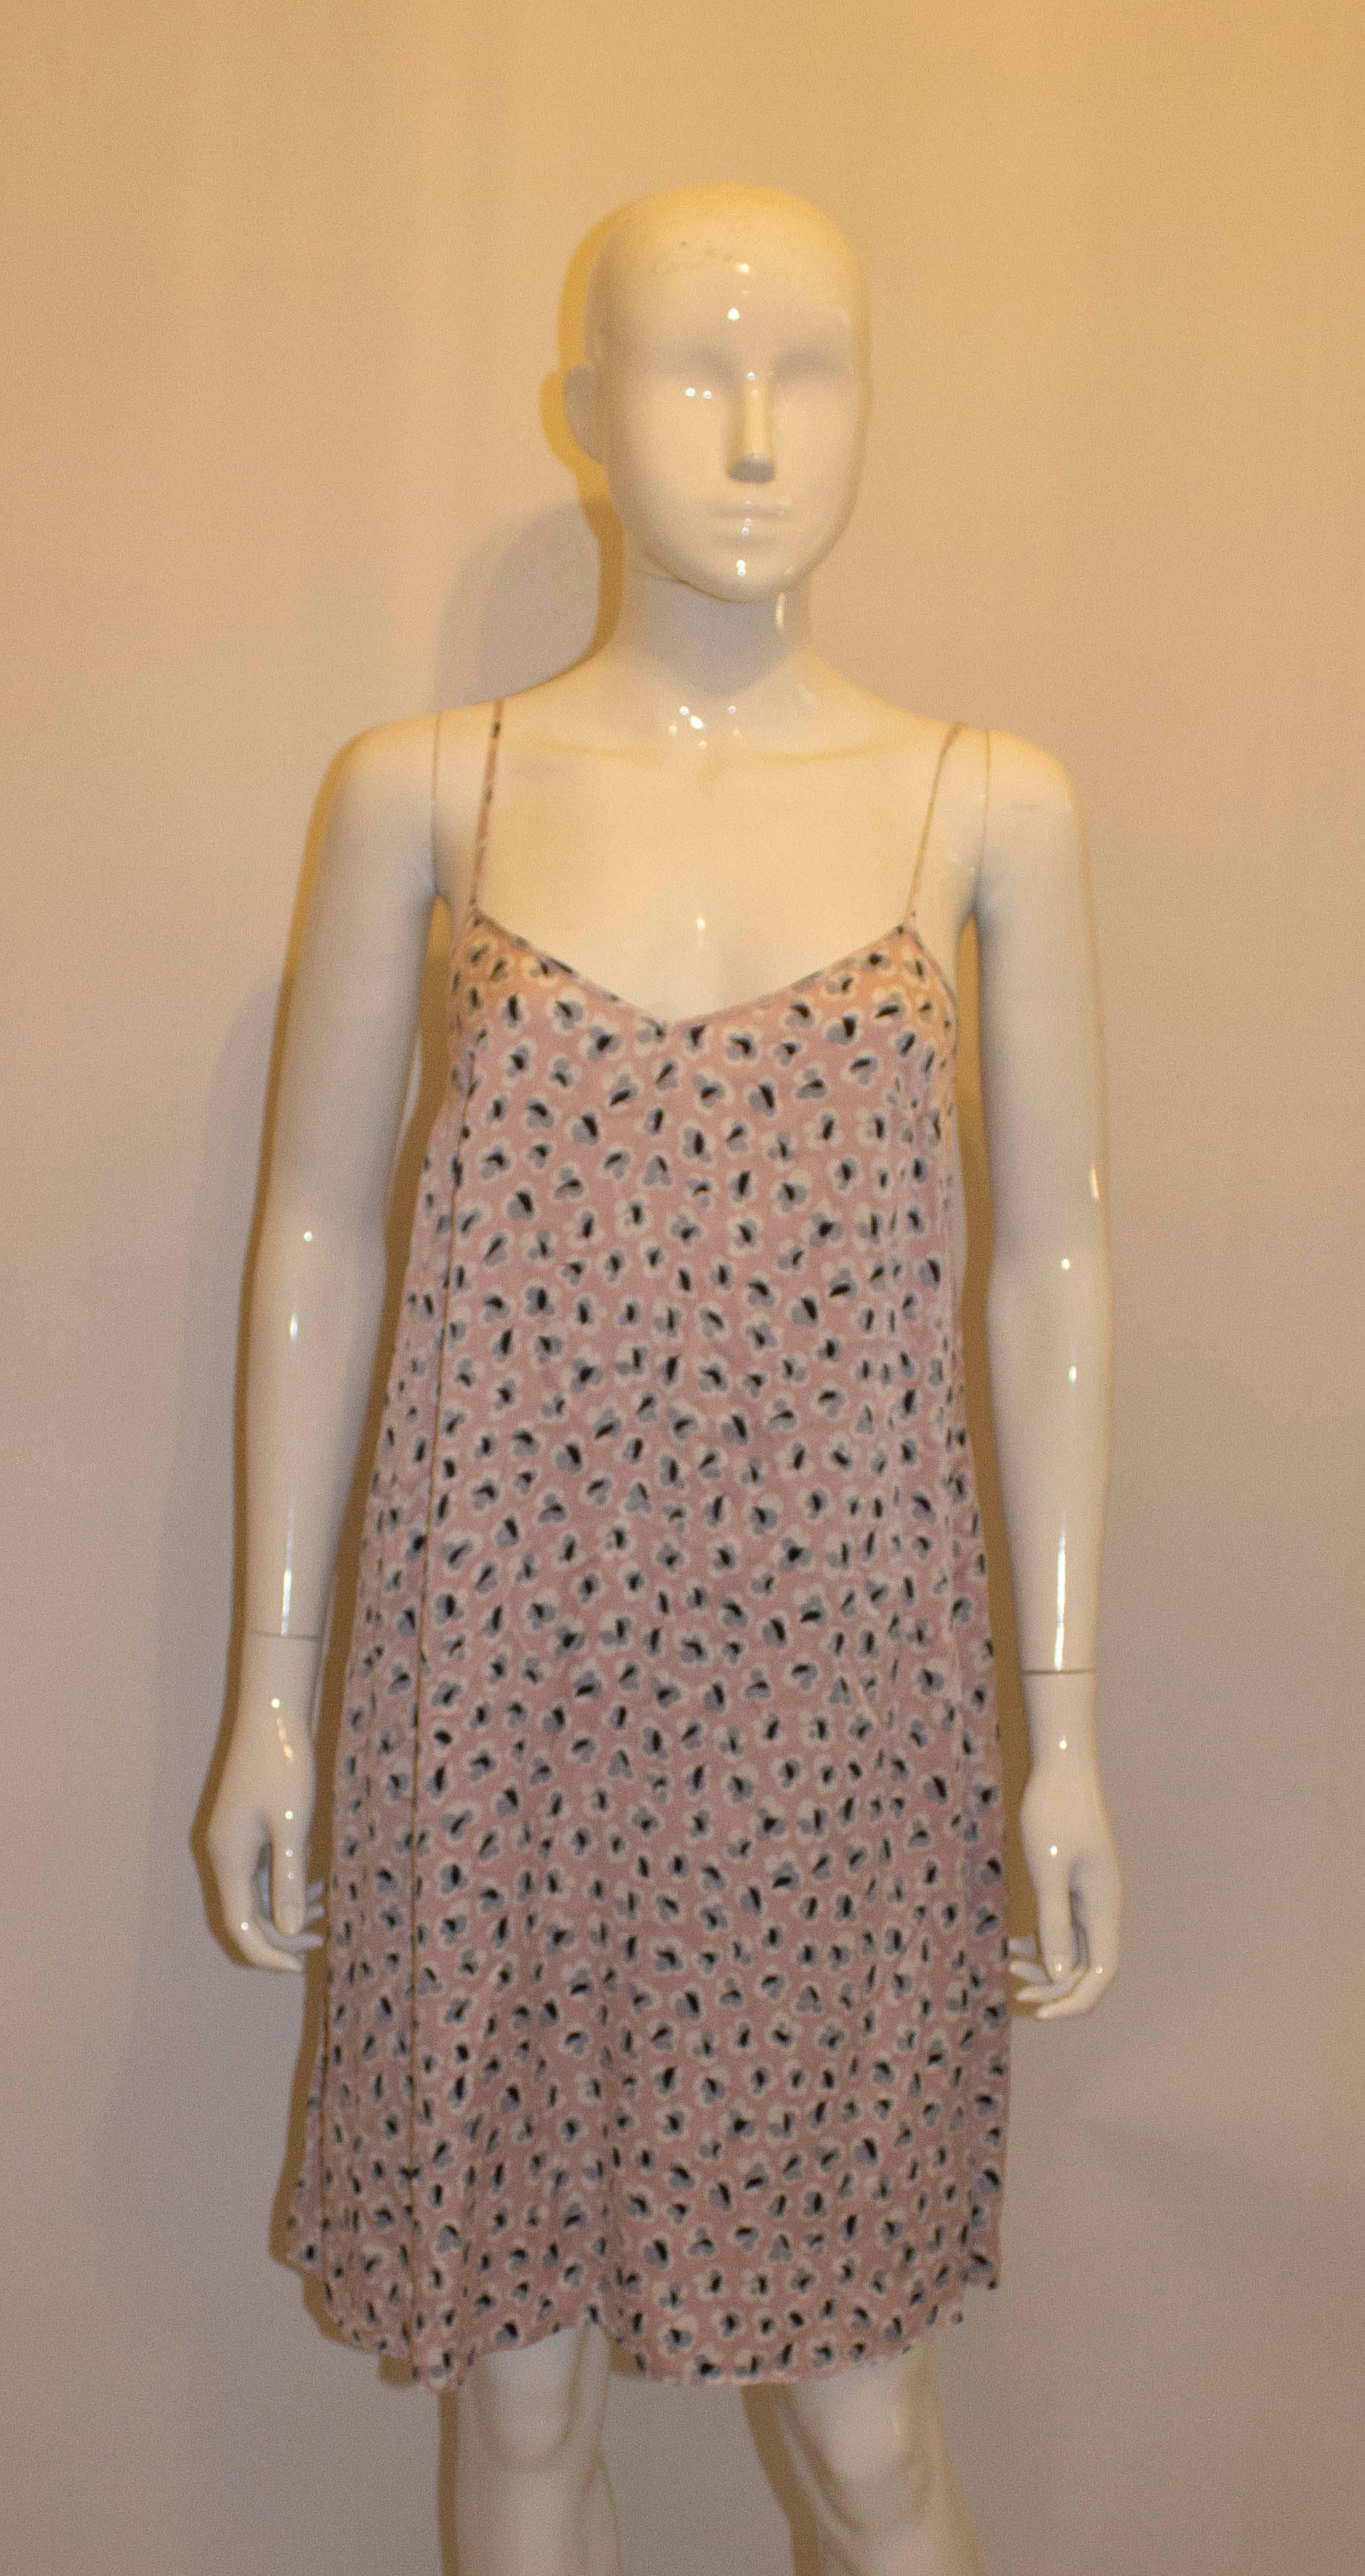 A pretty silk slip dress by Olivia von Halle. The dress has a pink background with a black and white print. It has adjustable straps and a pocket on either side. 
Size 3 Bust up to 38'', length 33''